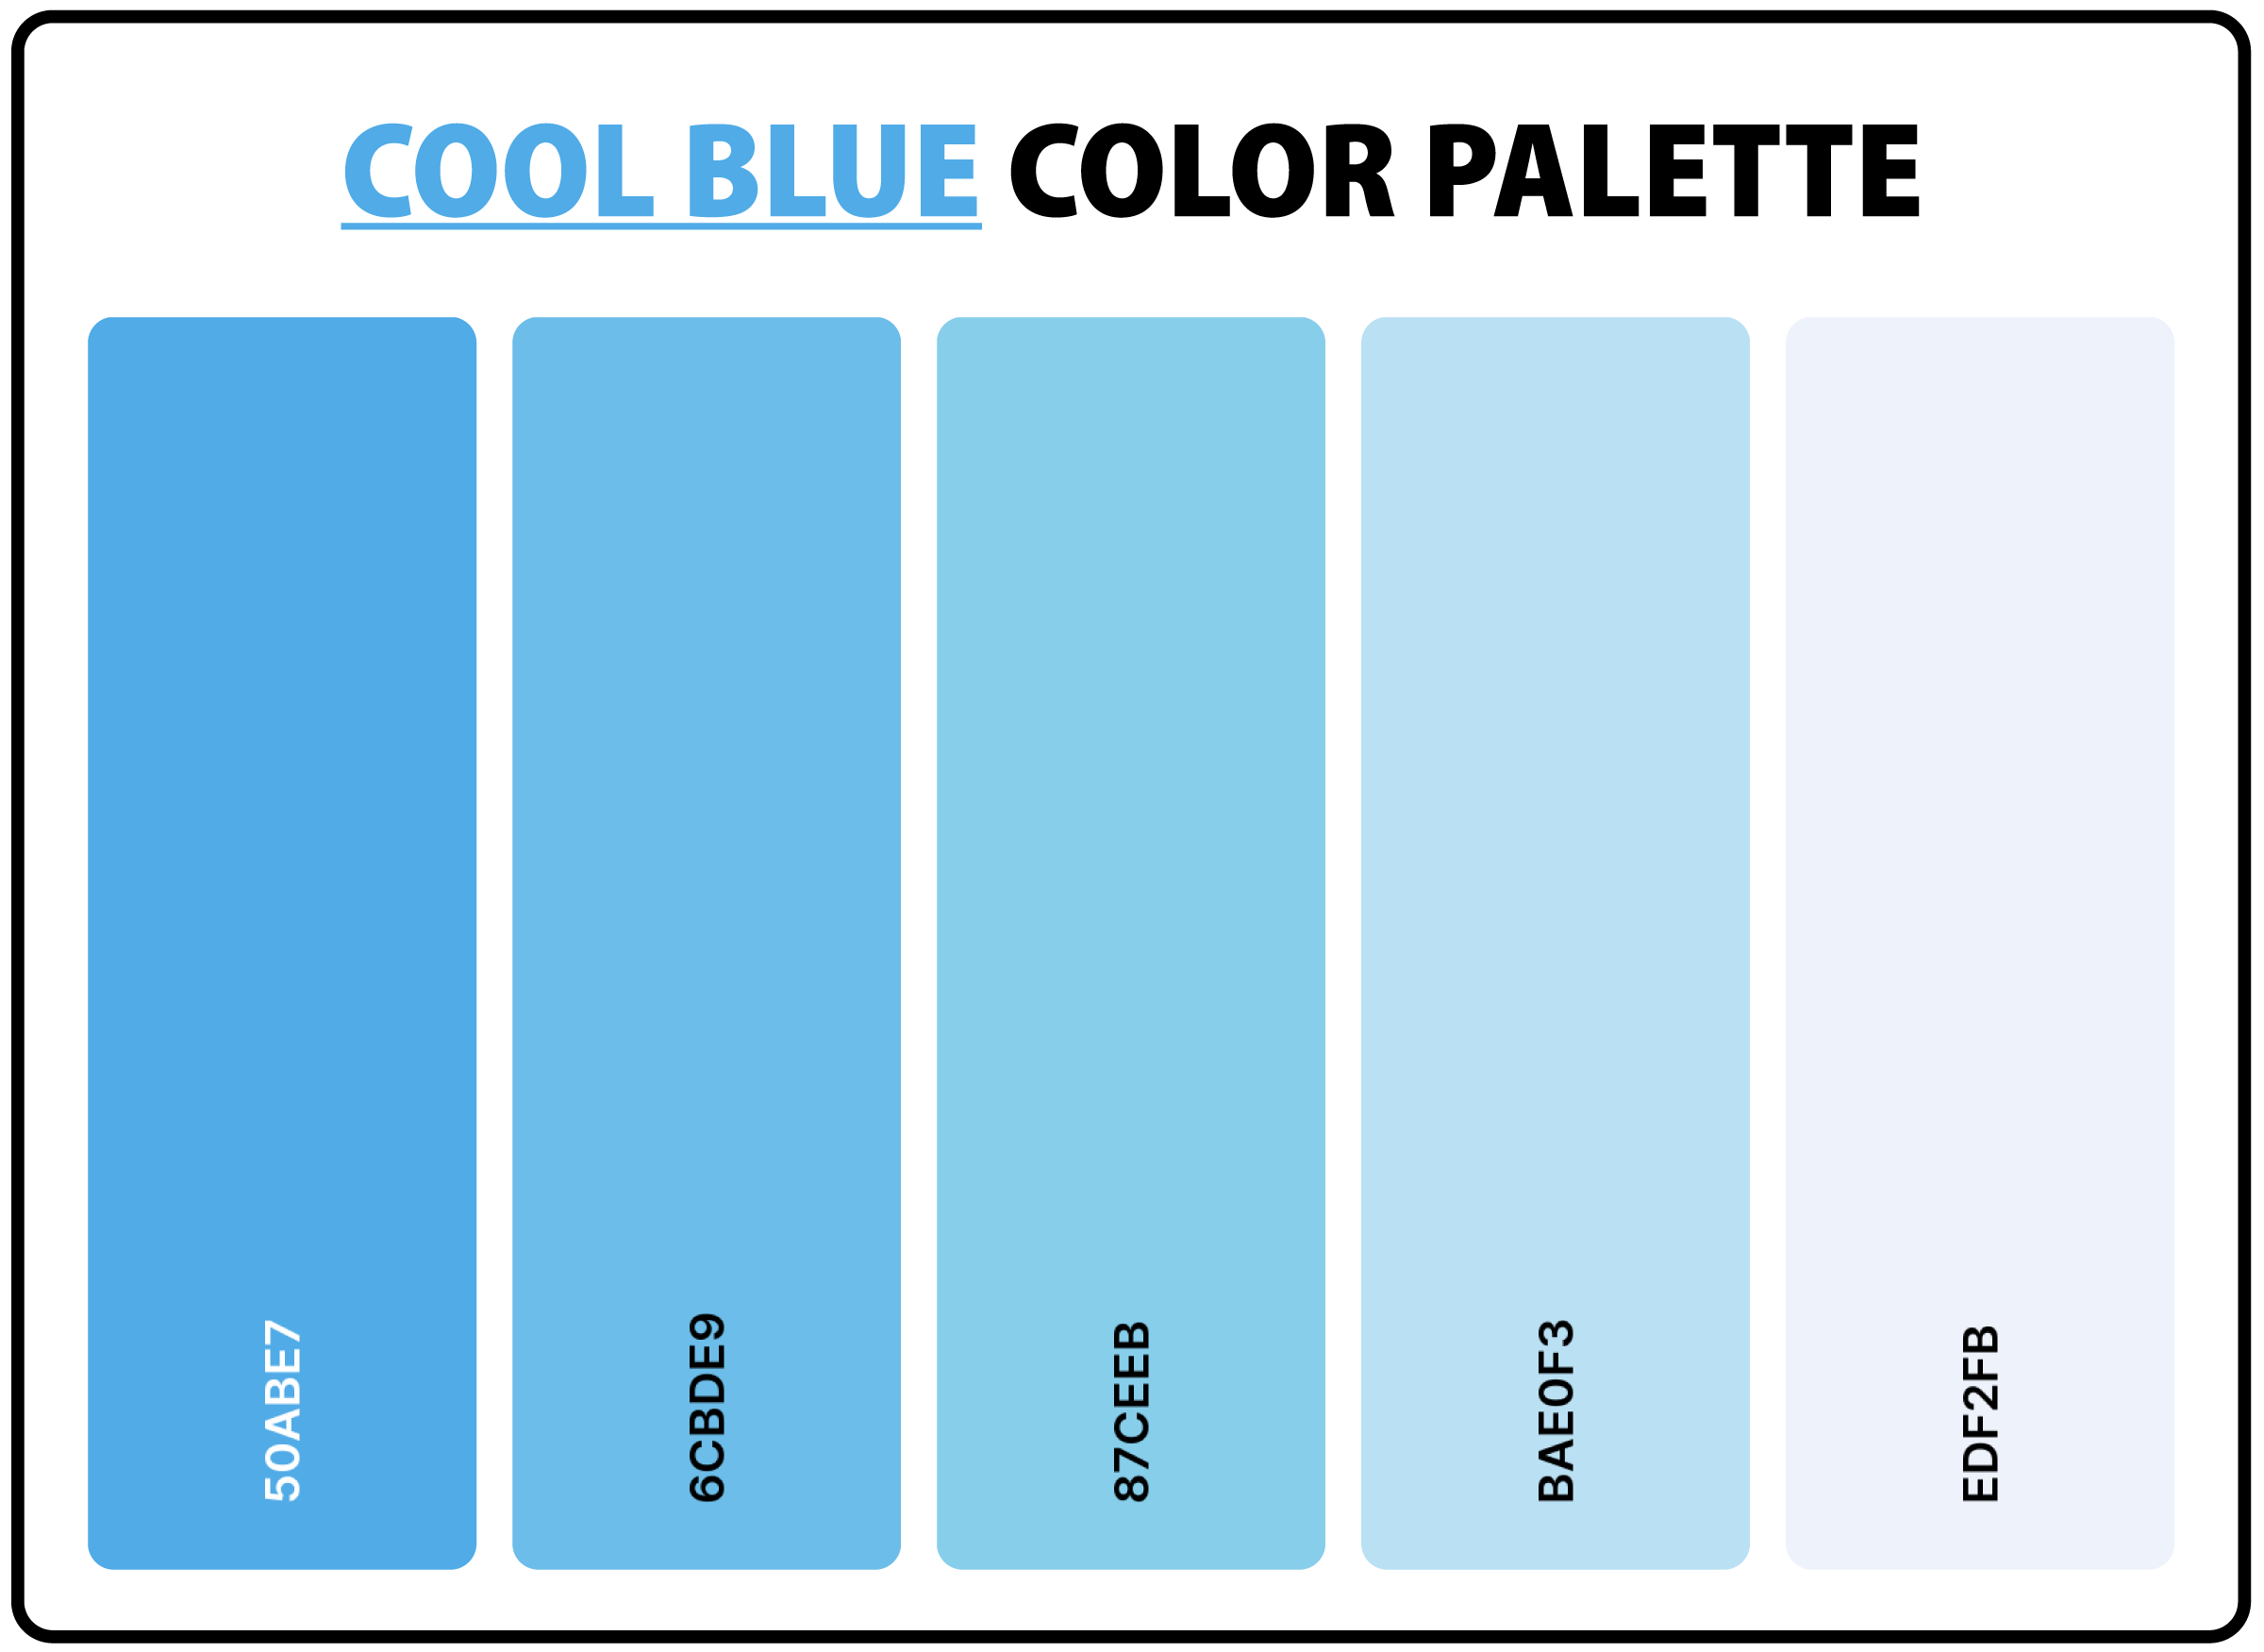 Cool-Blue-Color-Palette-with-Hex-Codes